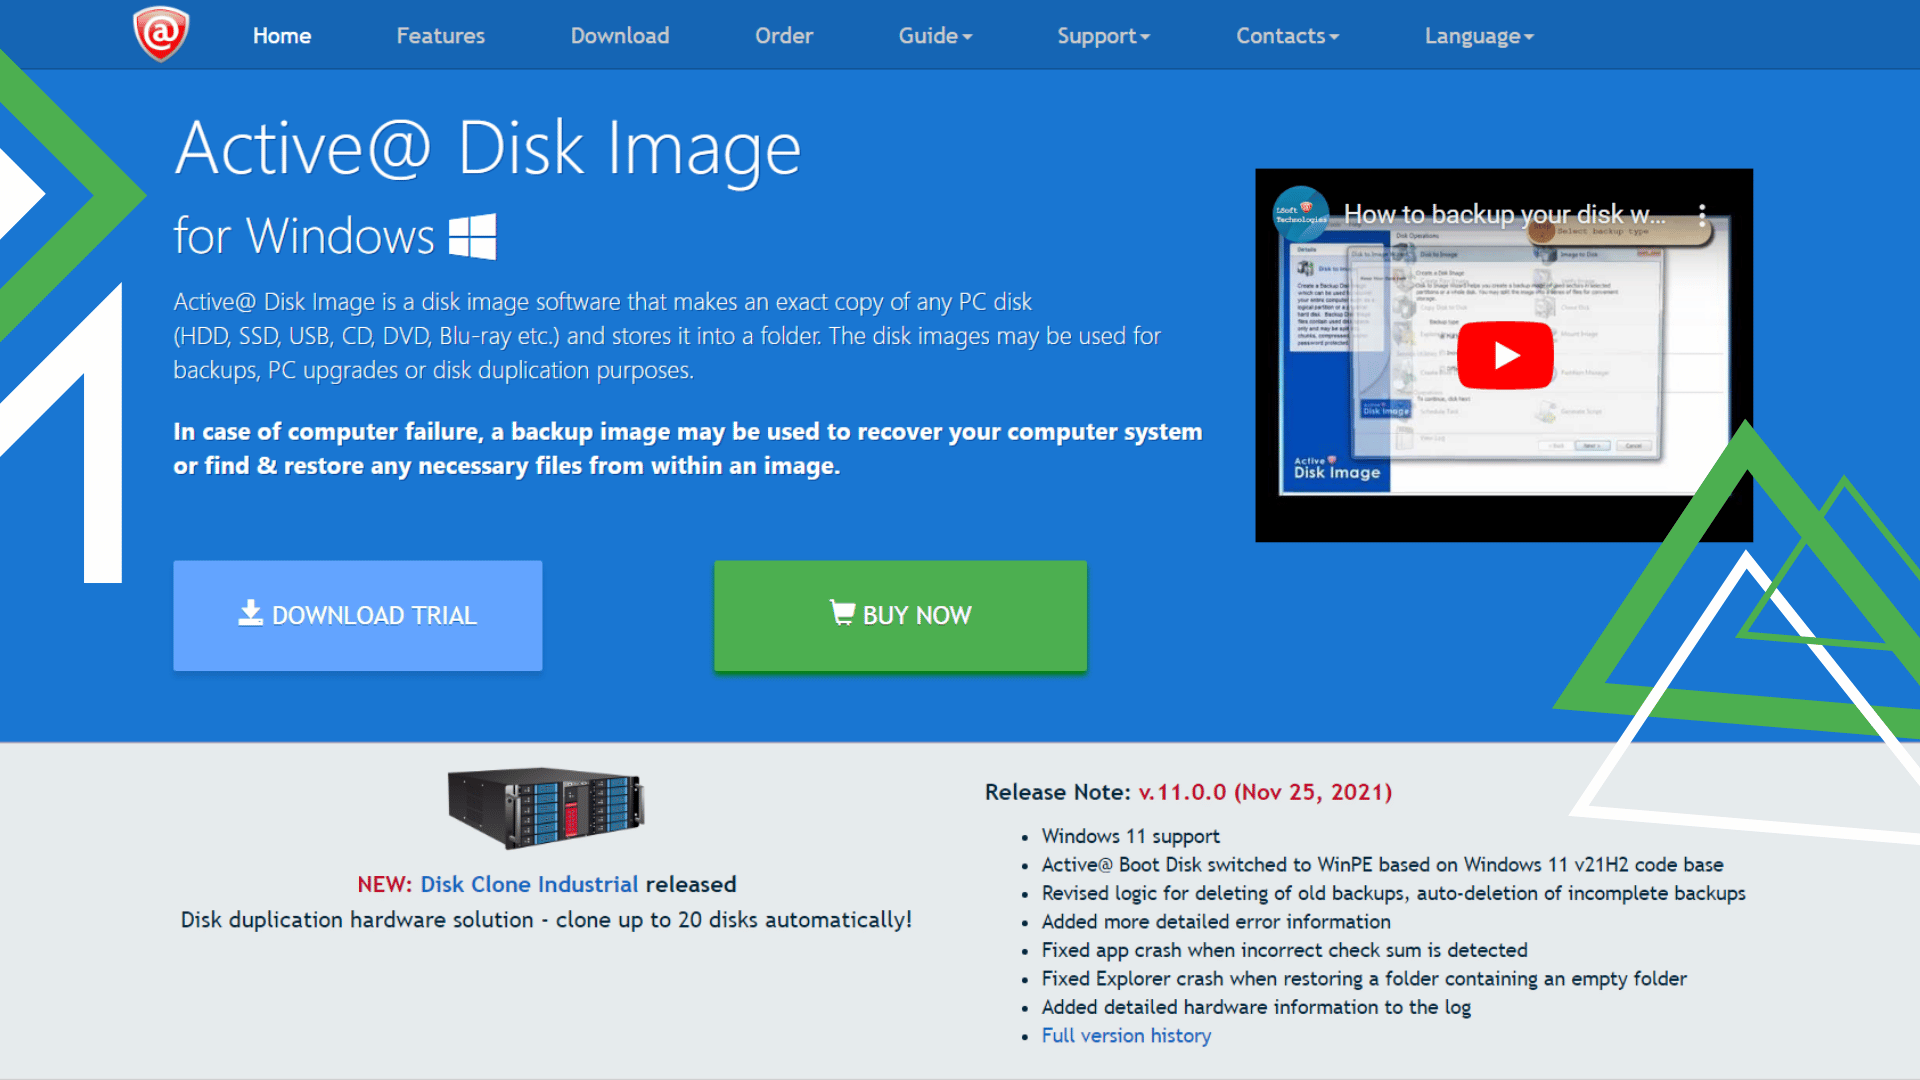 Active@ Disk Image Features